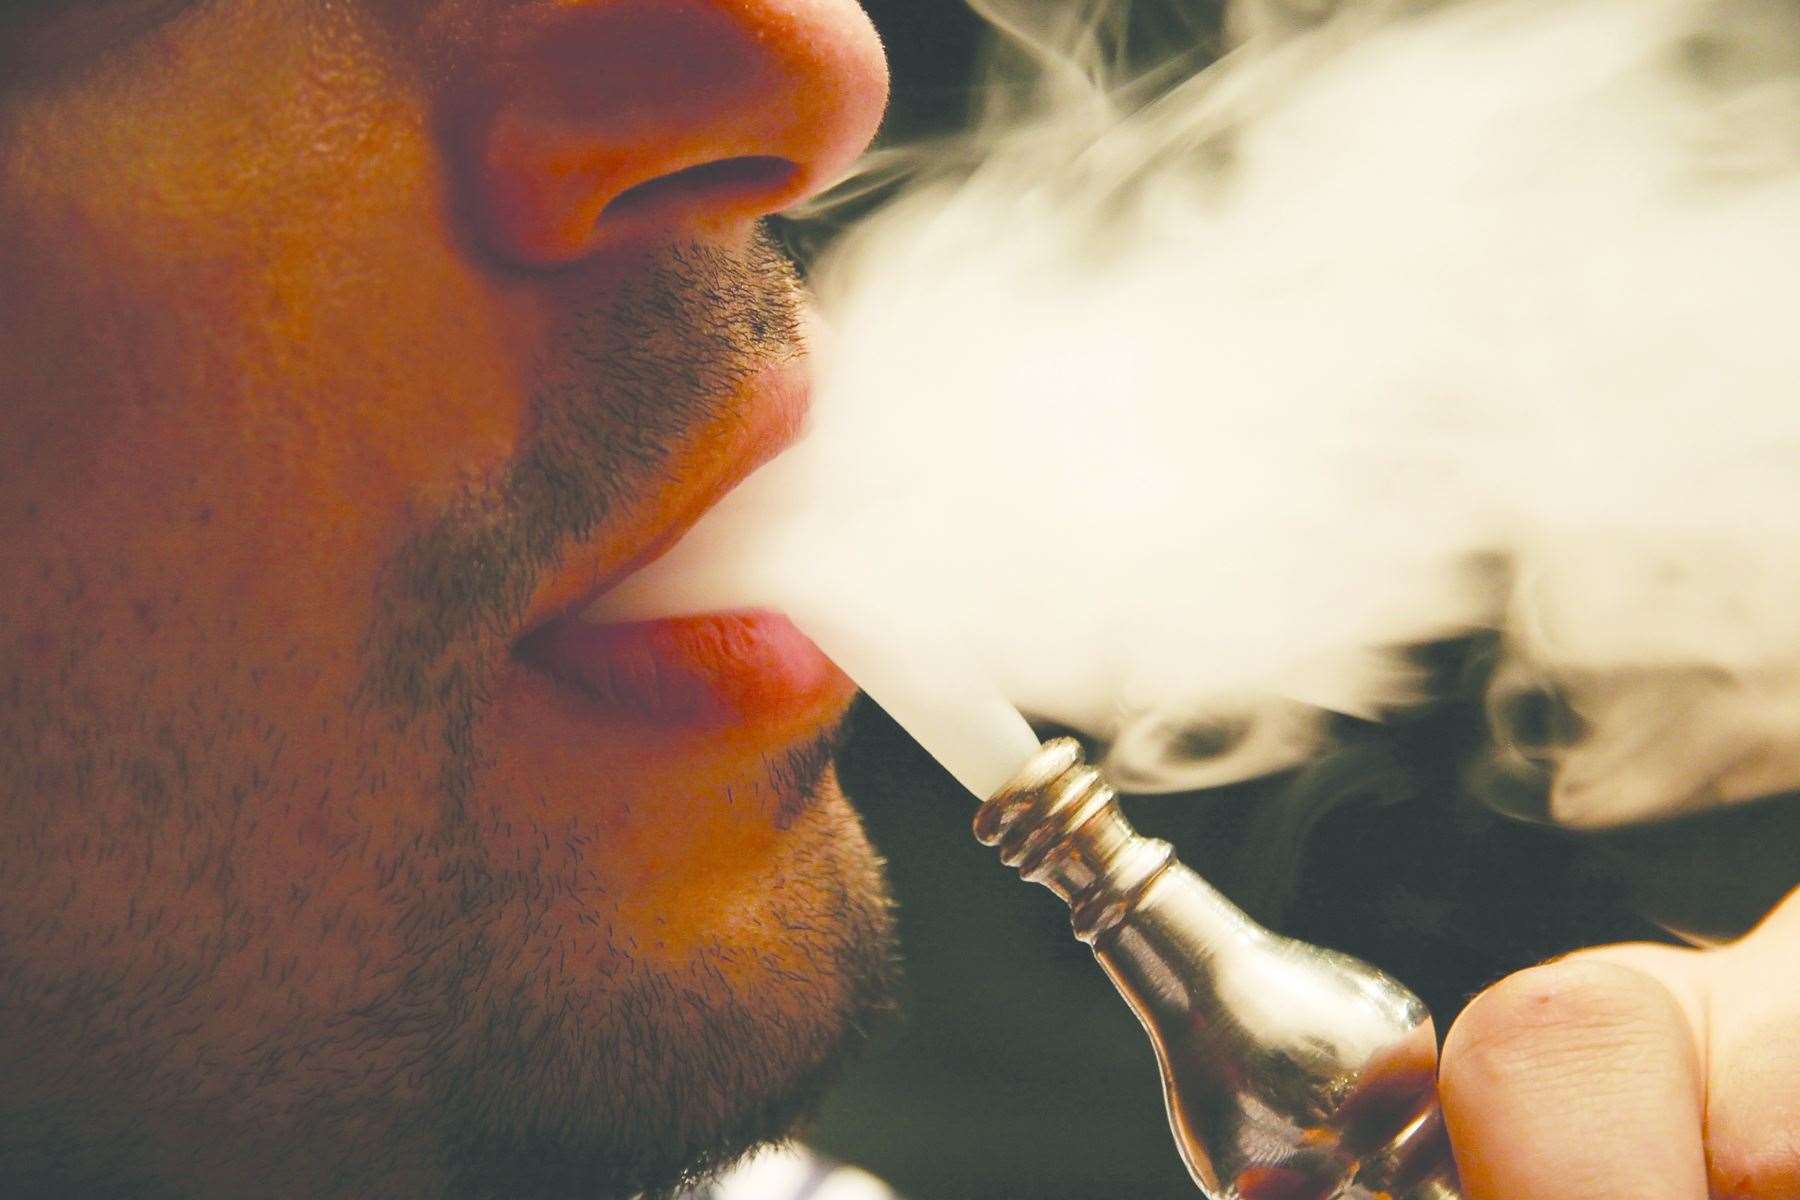 Vaping sees water vapour exhaled - rather than smoke